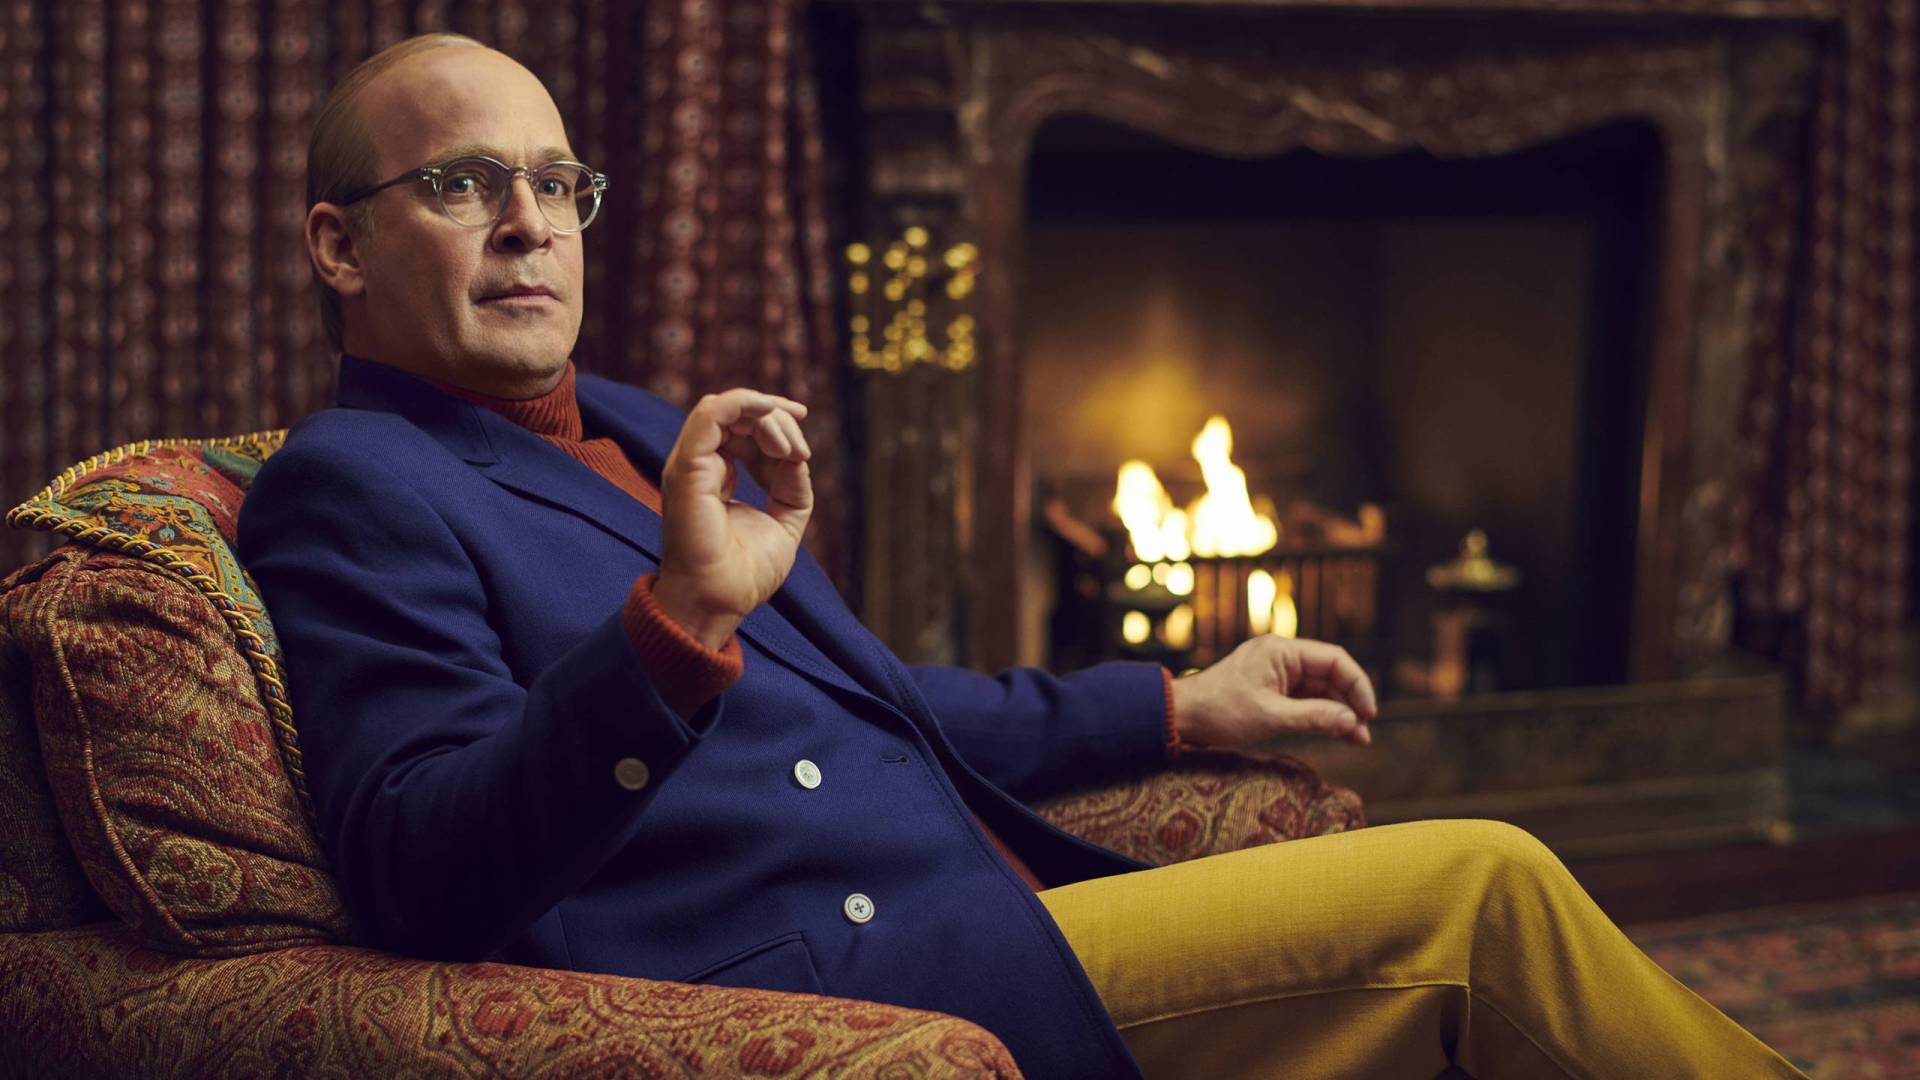 A refined man in a colorful 1970s-era suit sits before a fireplace. He is bald and wearing glasses.